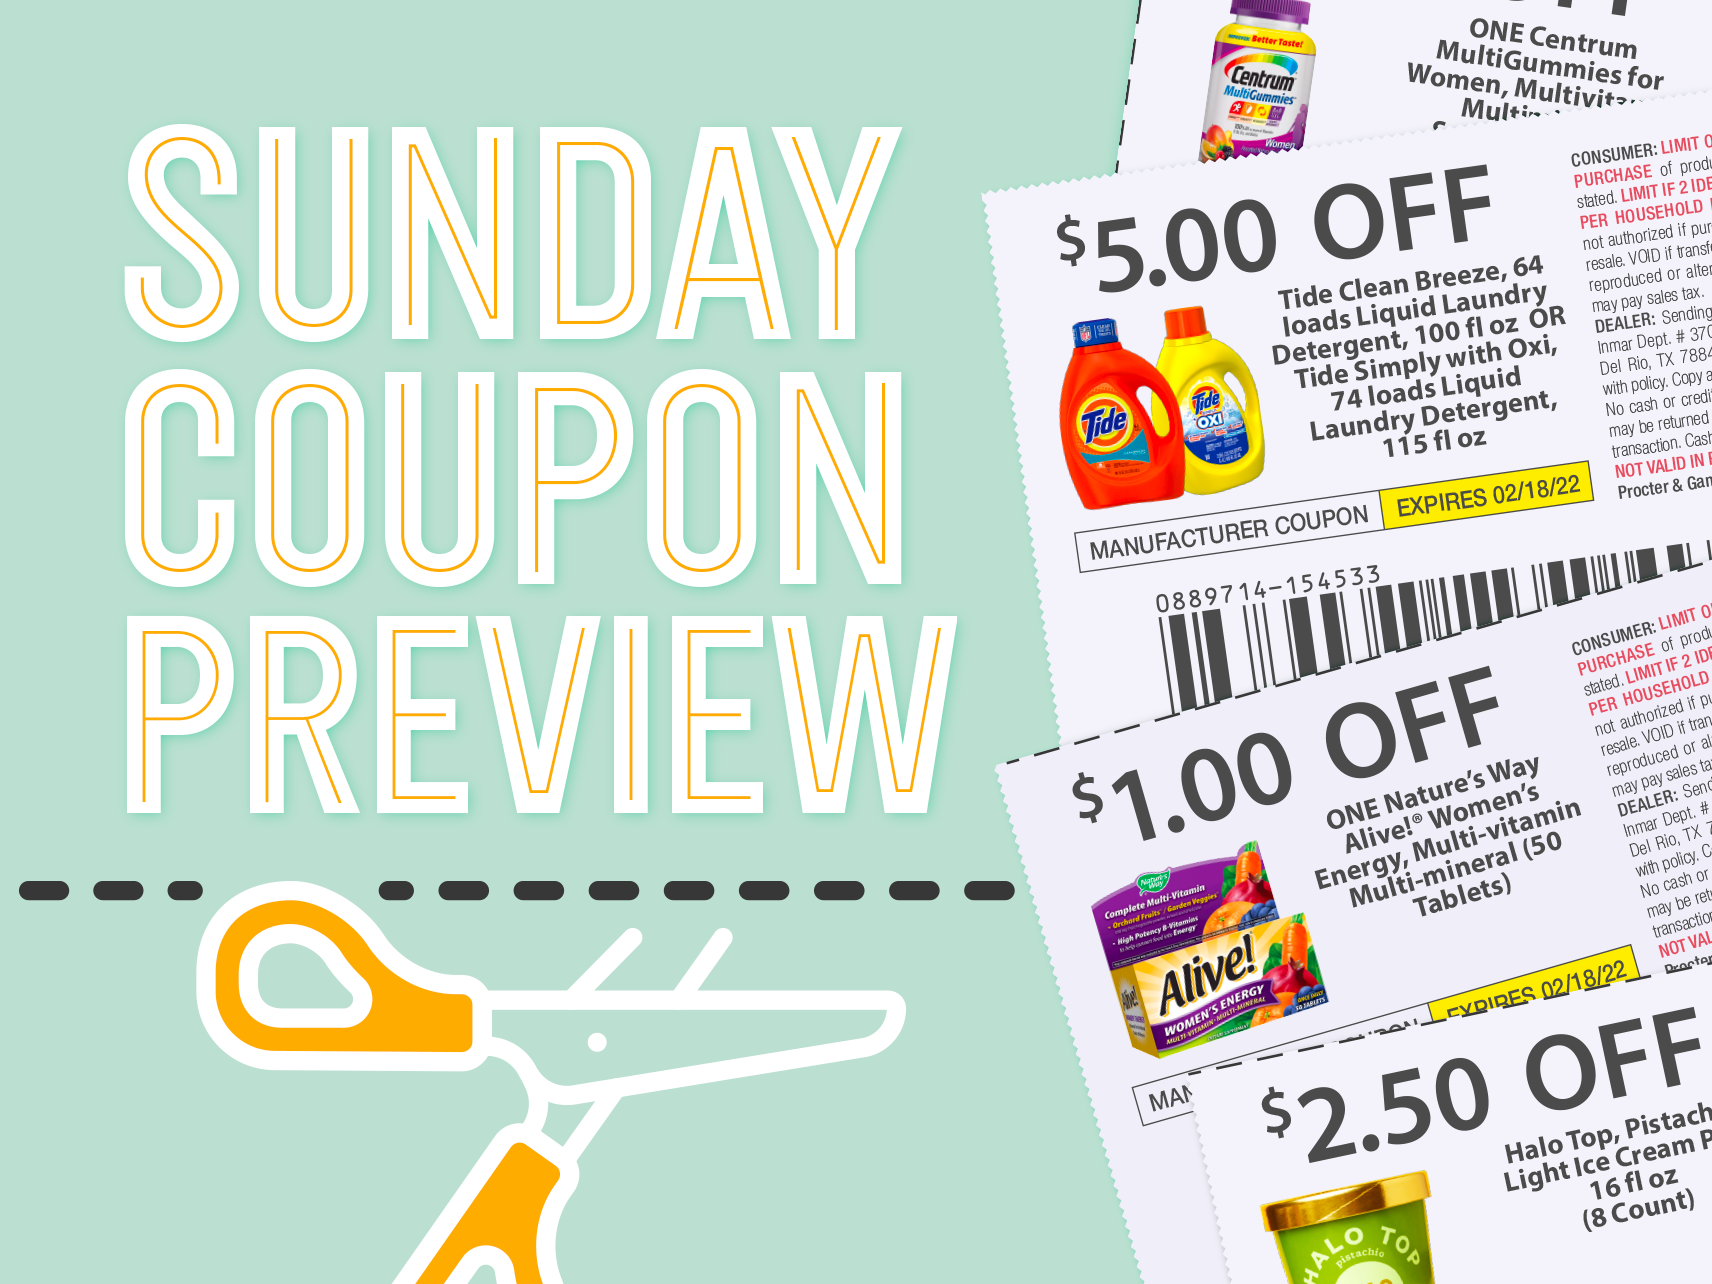 Sunday Coupon Preview For 3/5 – Three Inserts